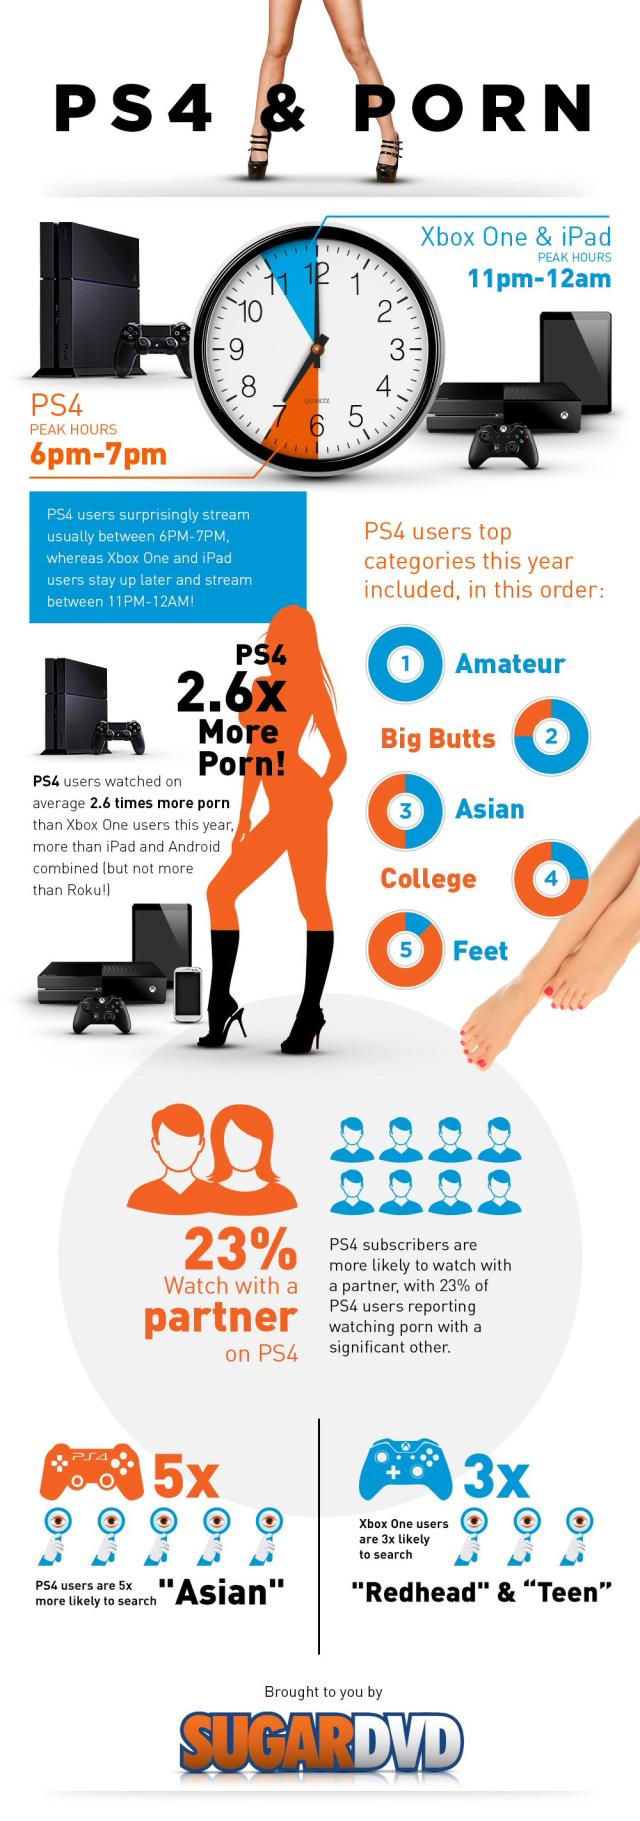 Ps4 Porn - PS4 owners watch 2.6-times more porn than those on Xbox One